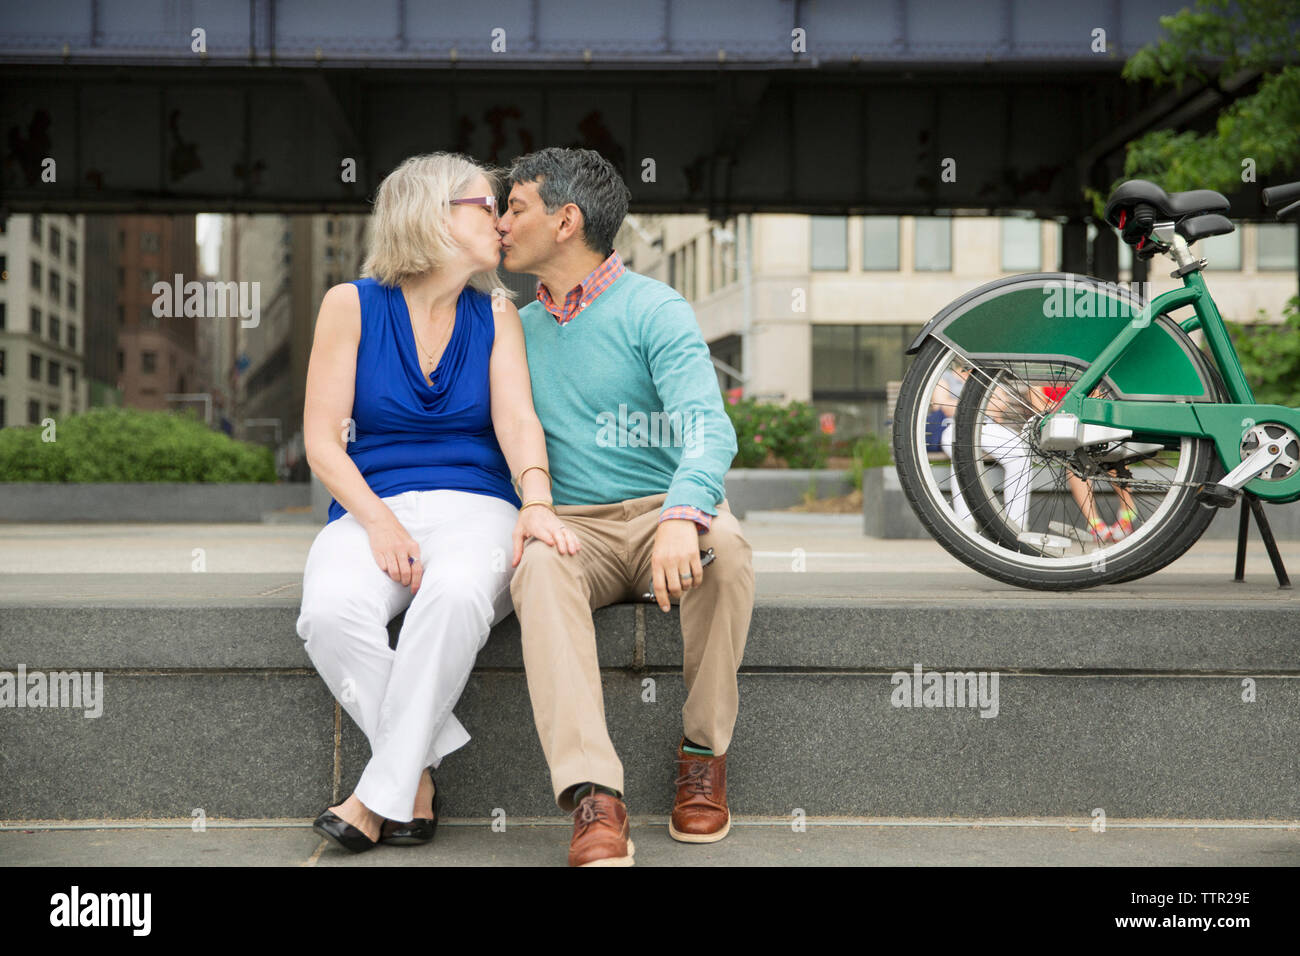 Mature couple kissing while sitting on steps in city Banque D'Images